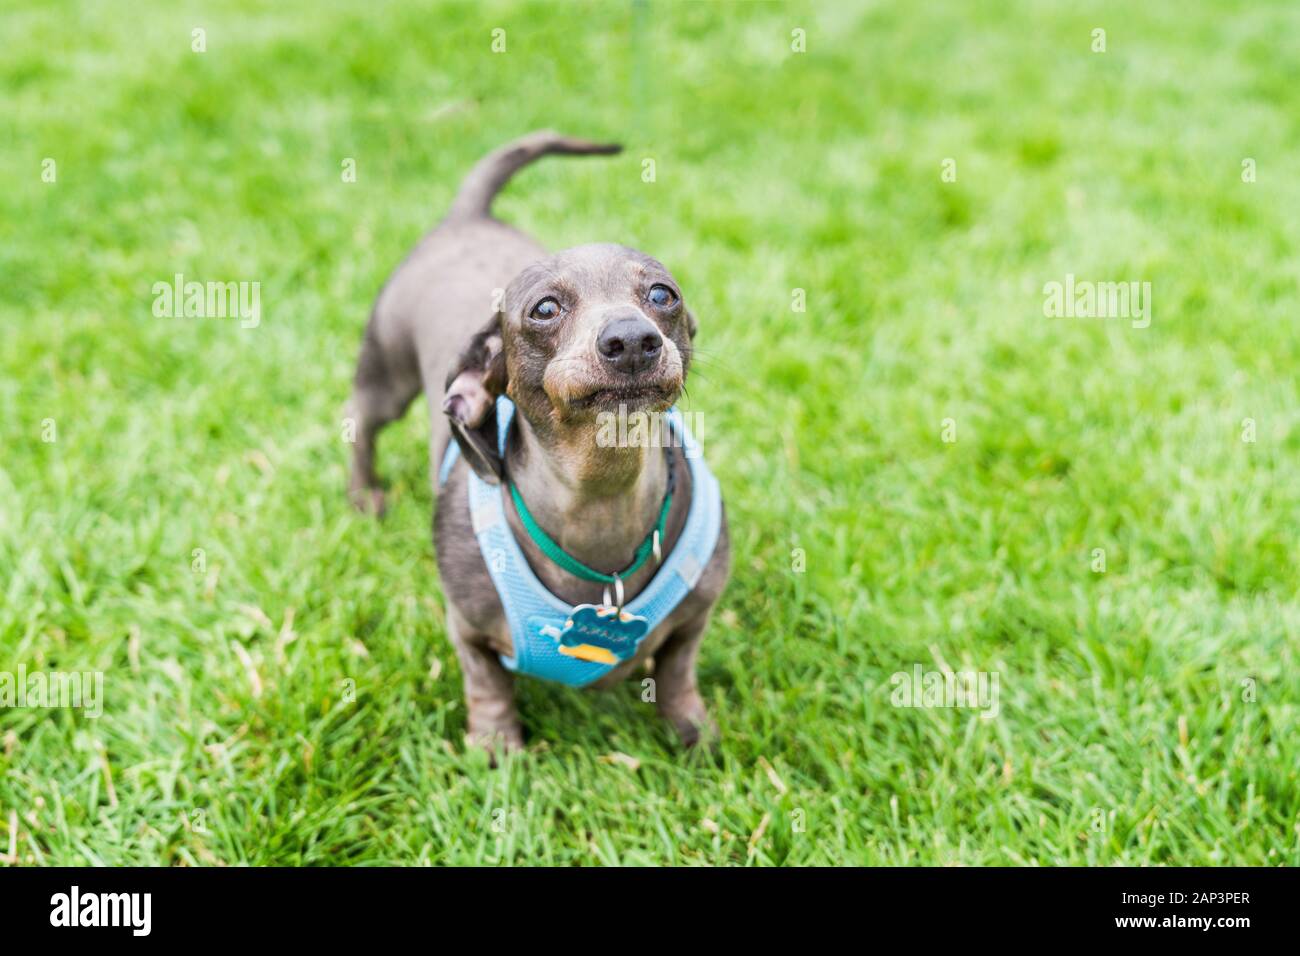 Little Dachshund dog making a funny face. Stock Photo